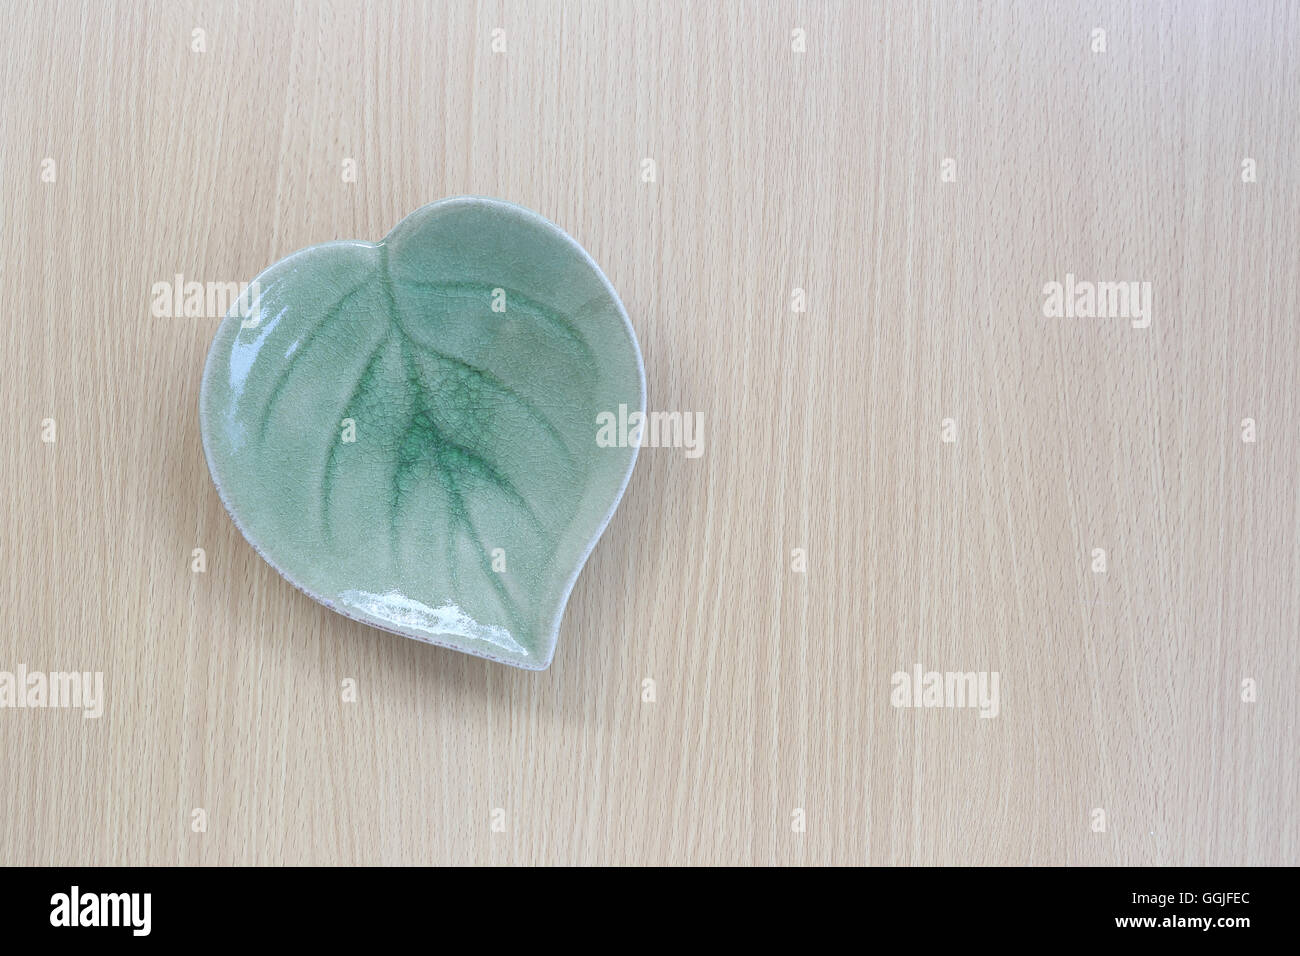 Green leaf shape dish in top view on wood background for design concept food. Stock Photo